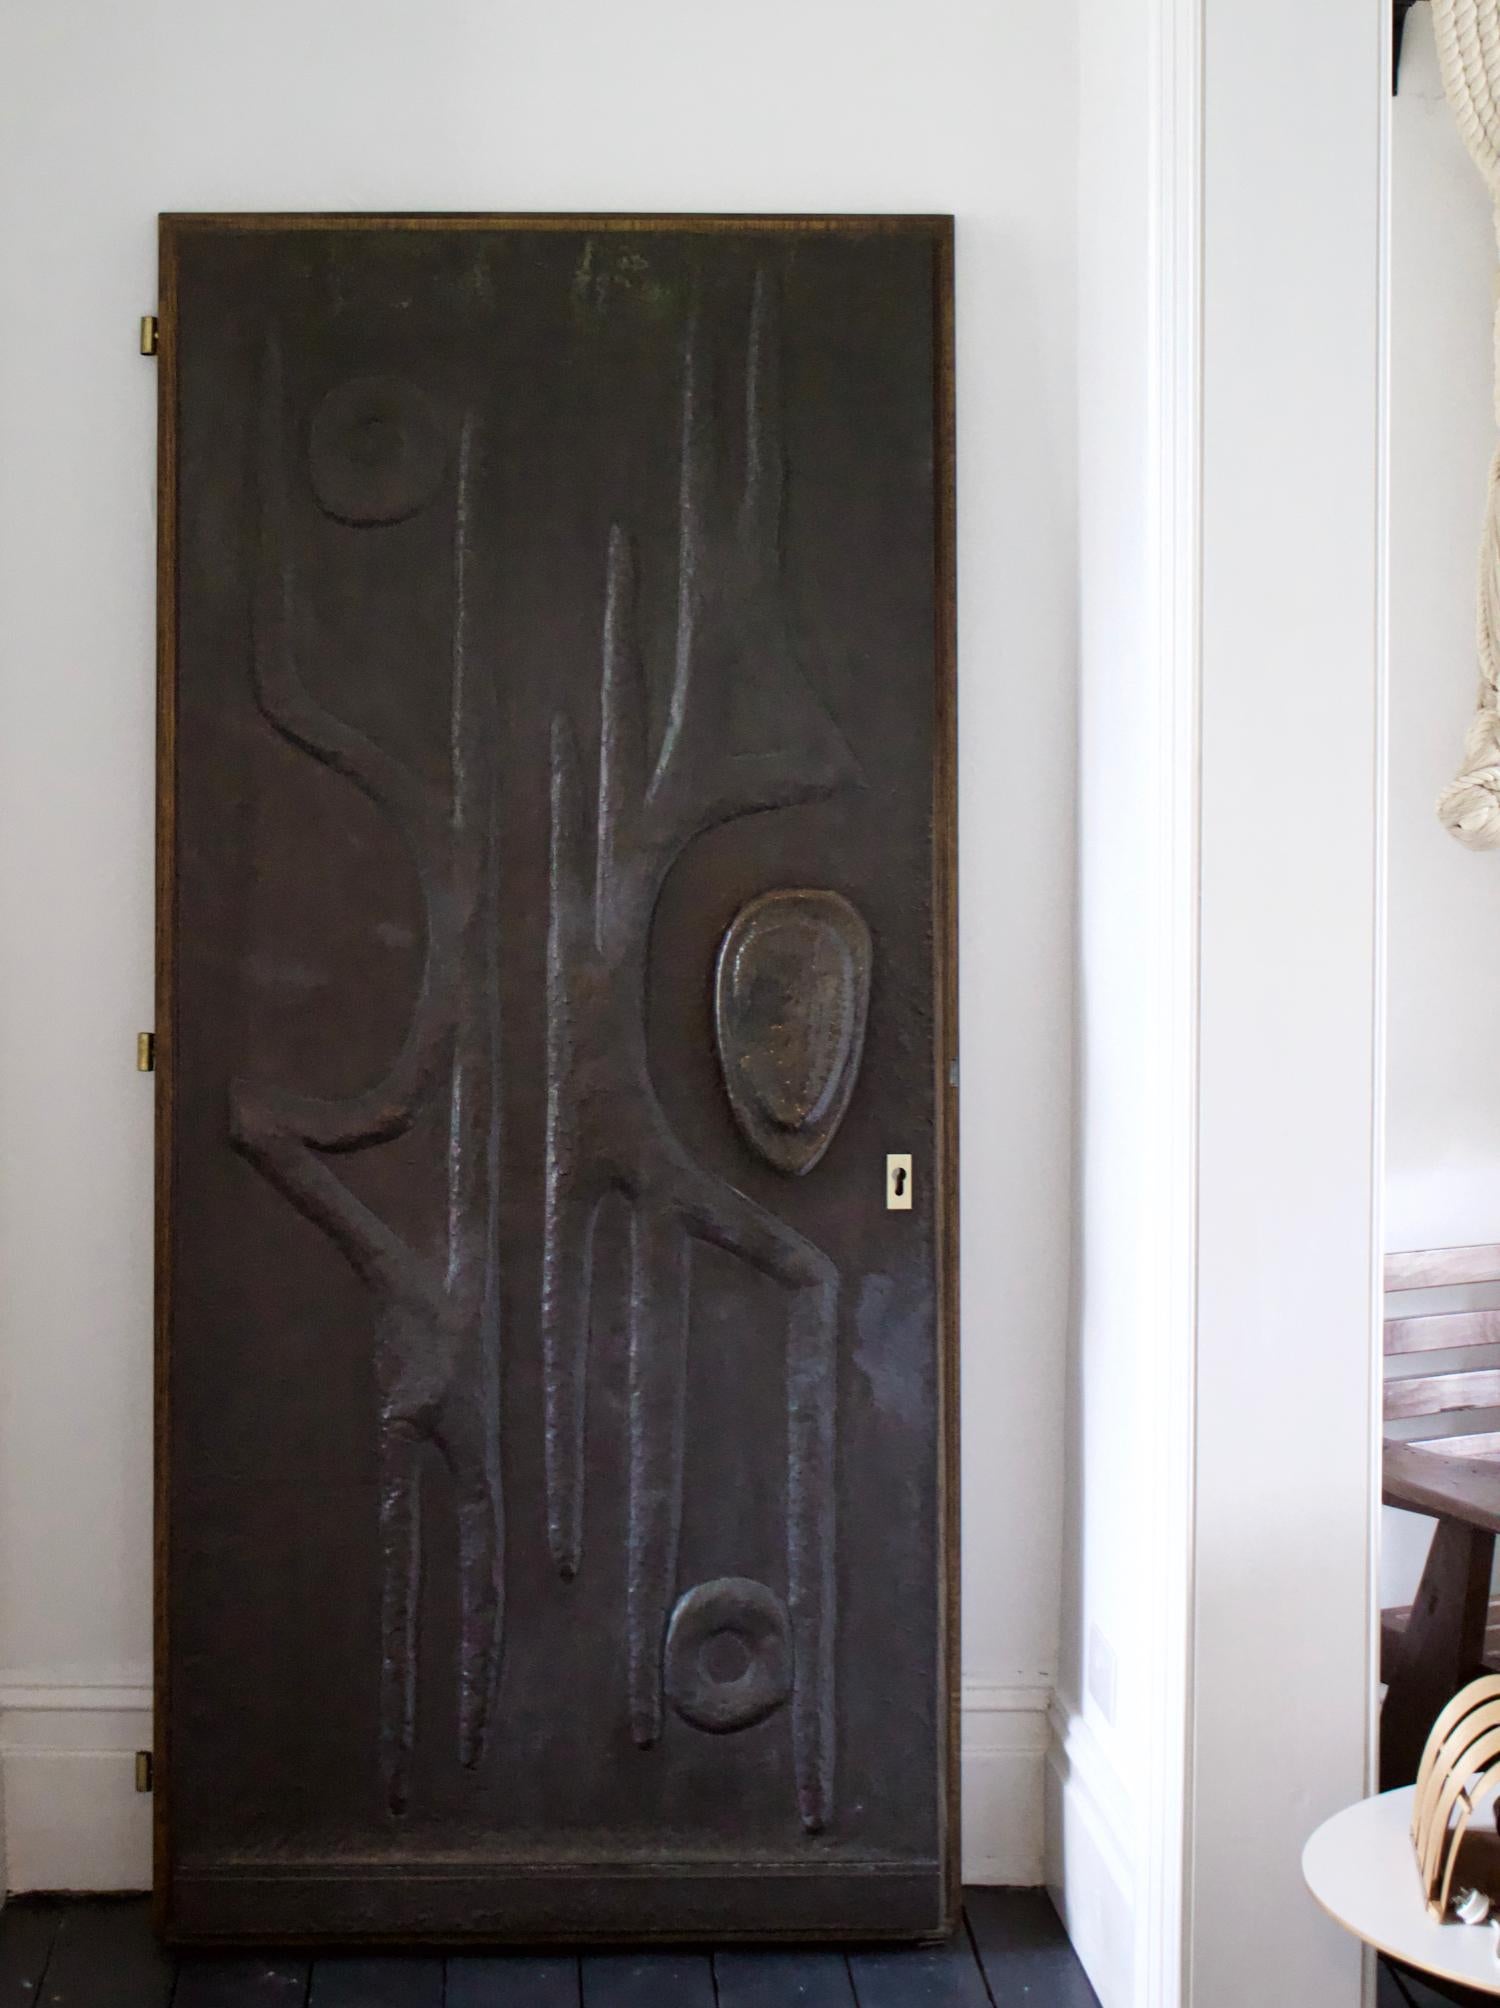 An impressive solid oak door, clad to one side in hammered copper with a wonderful abstract design. Found in Germany, probably dating from the 1970s. A solid, heavy piece, nicely made, in good condition, with minor signs of wear from age and